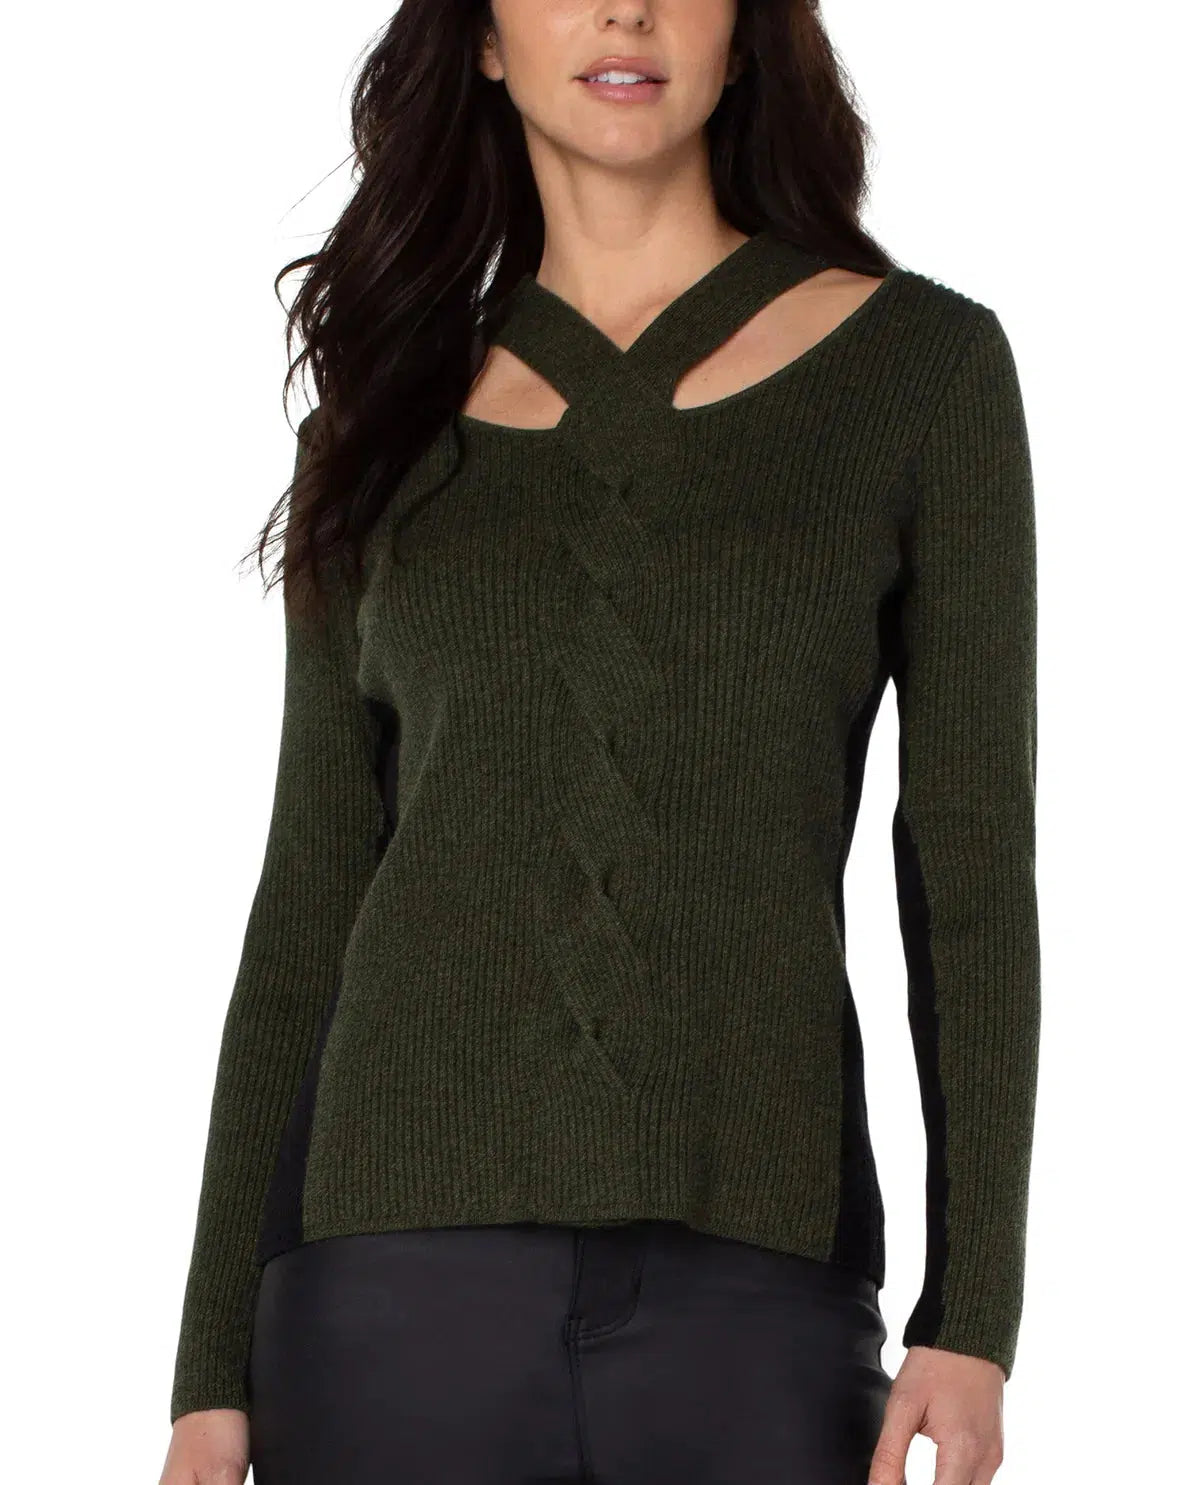 Cable Twist Sweater-Black, Cable Twist, clothing, Long Sleeve, Pine Heather, Sweater, Sweaters, Top, Tops, Women, women's-XS-[option4]-[option5]-[option6]-Bella Bliss Boutique in Texas